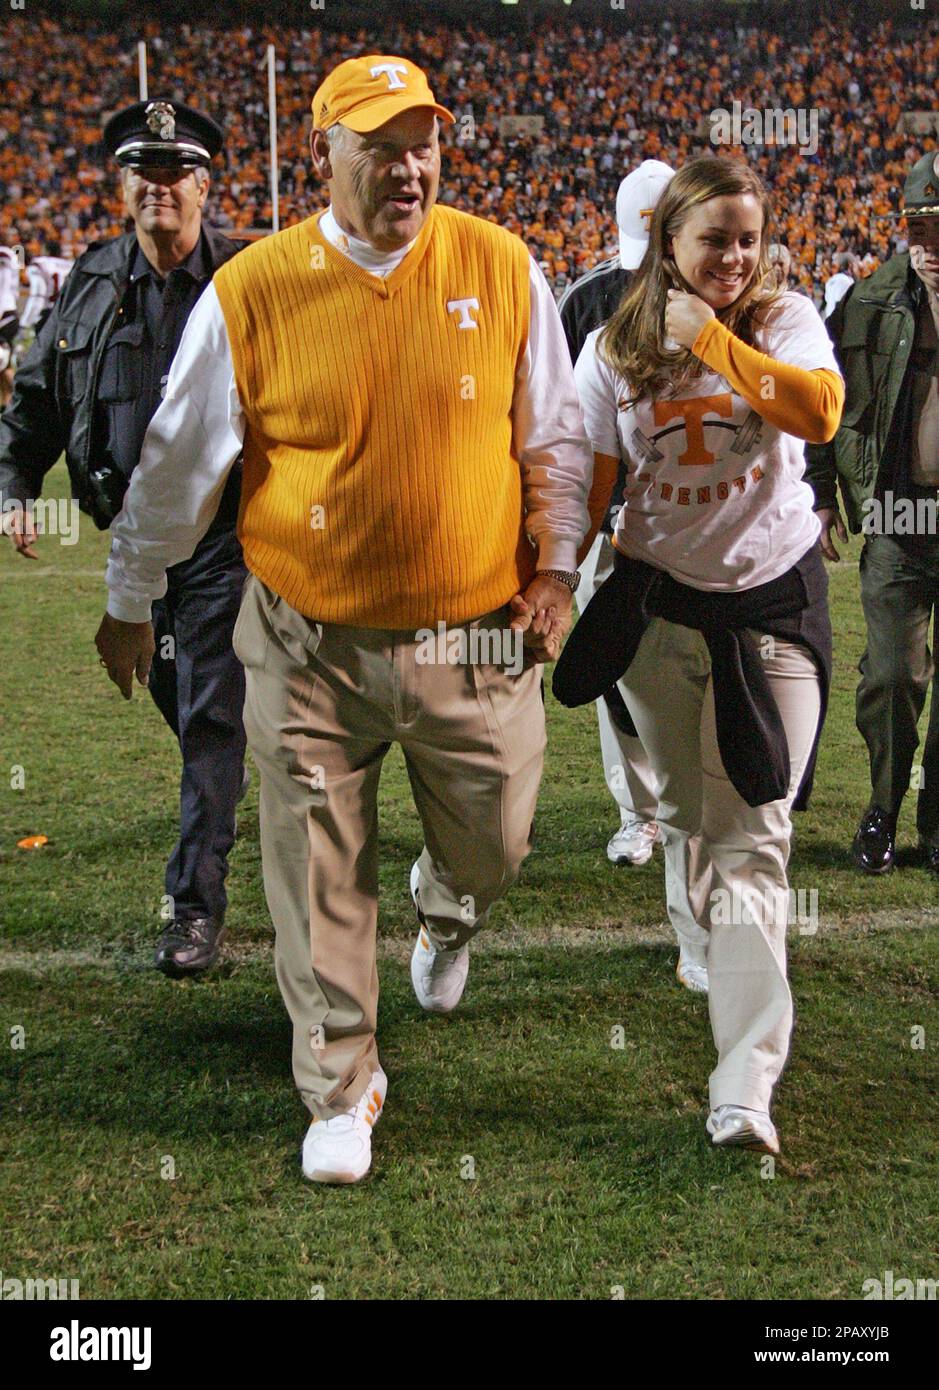 Tennessee coach Phillip Fulmer leaves the field with his daughter Allison after his team defeated South Carolina in overtime 27-24 in a college football game Saturday, Oct. 27, 2007 in Knoxville, Tenn. (